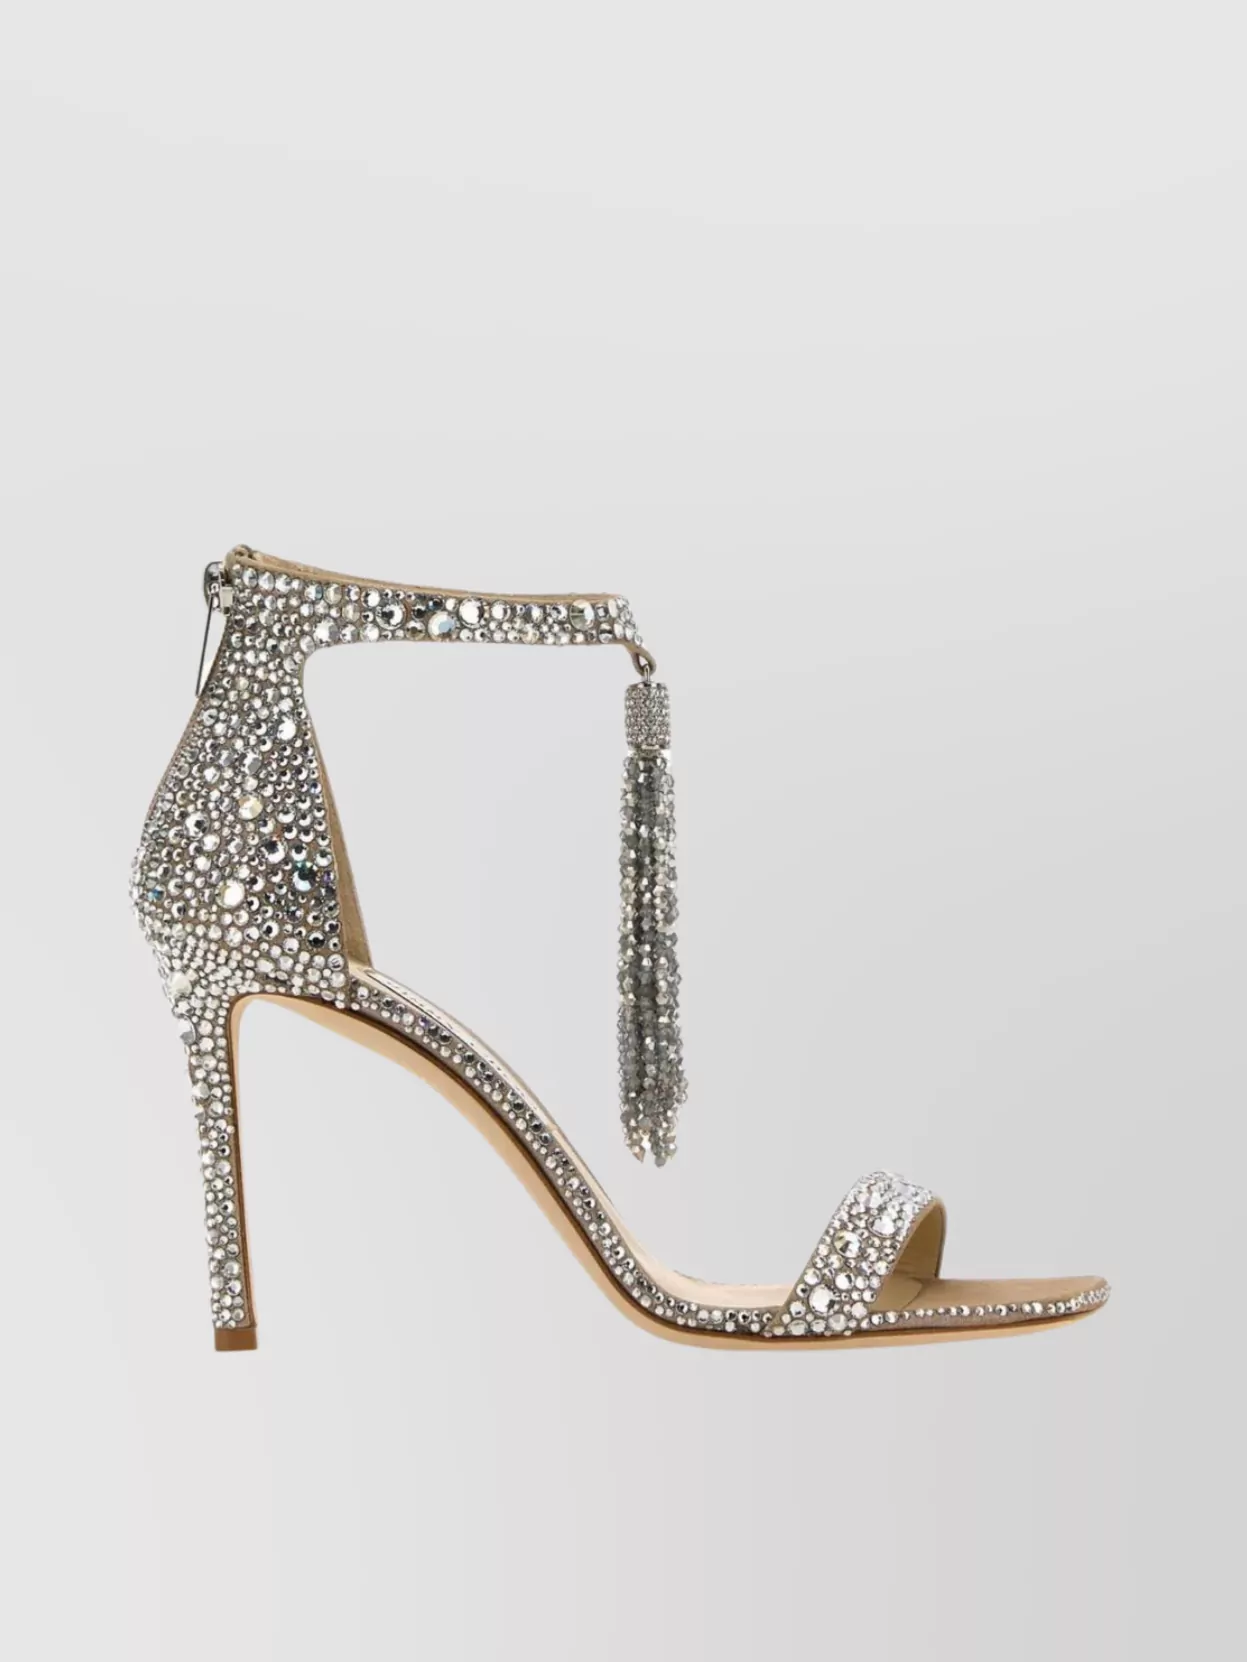 JIMMY CHOO FABRIC VINCA 95 SANDALS WITH EMBELLISHED DETAIL